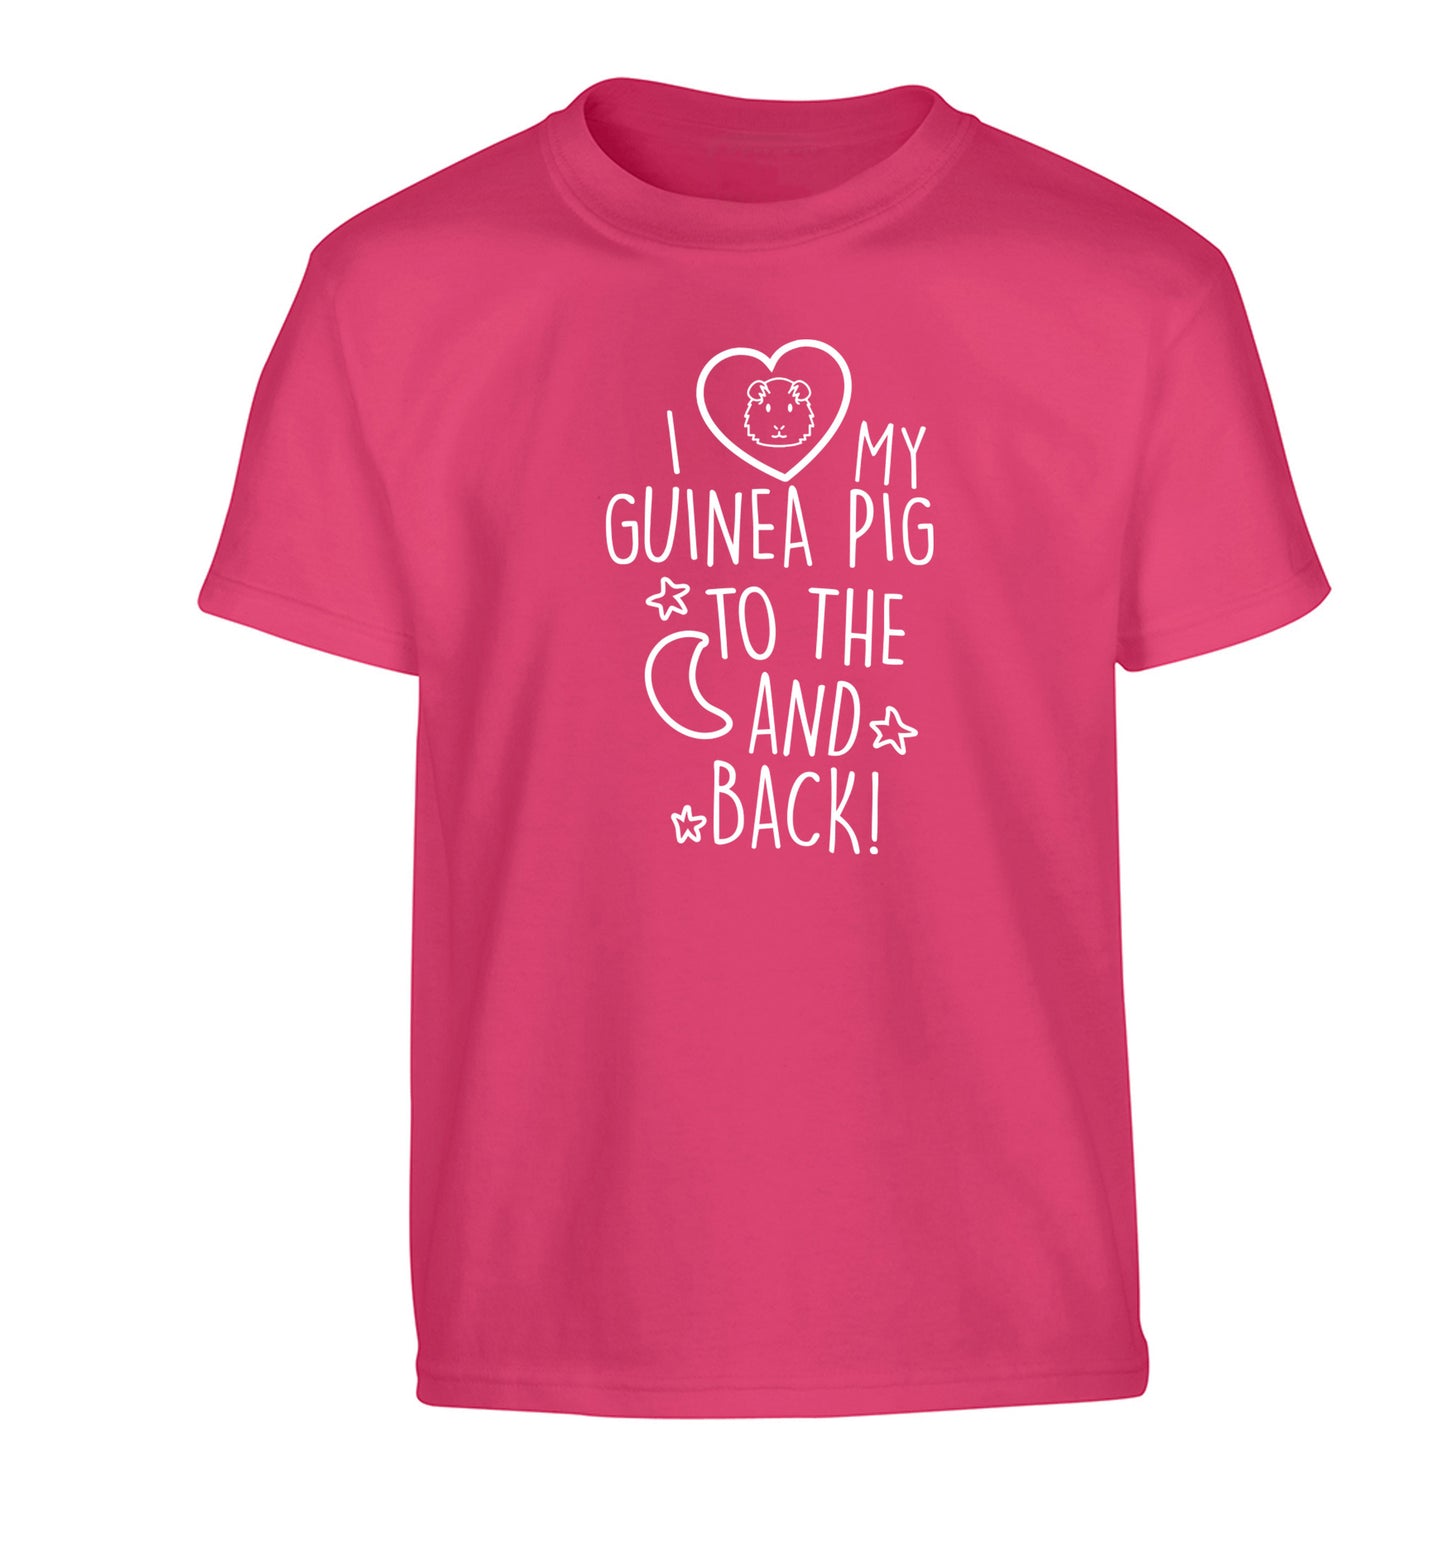 I love my guinea pig to the moon and back Children's pink Tshirt 12-14 Years